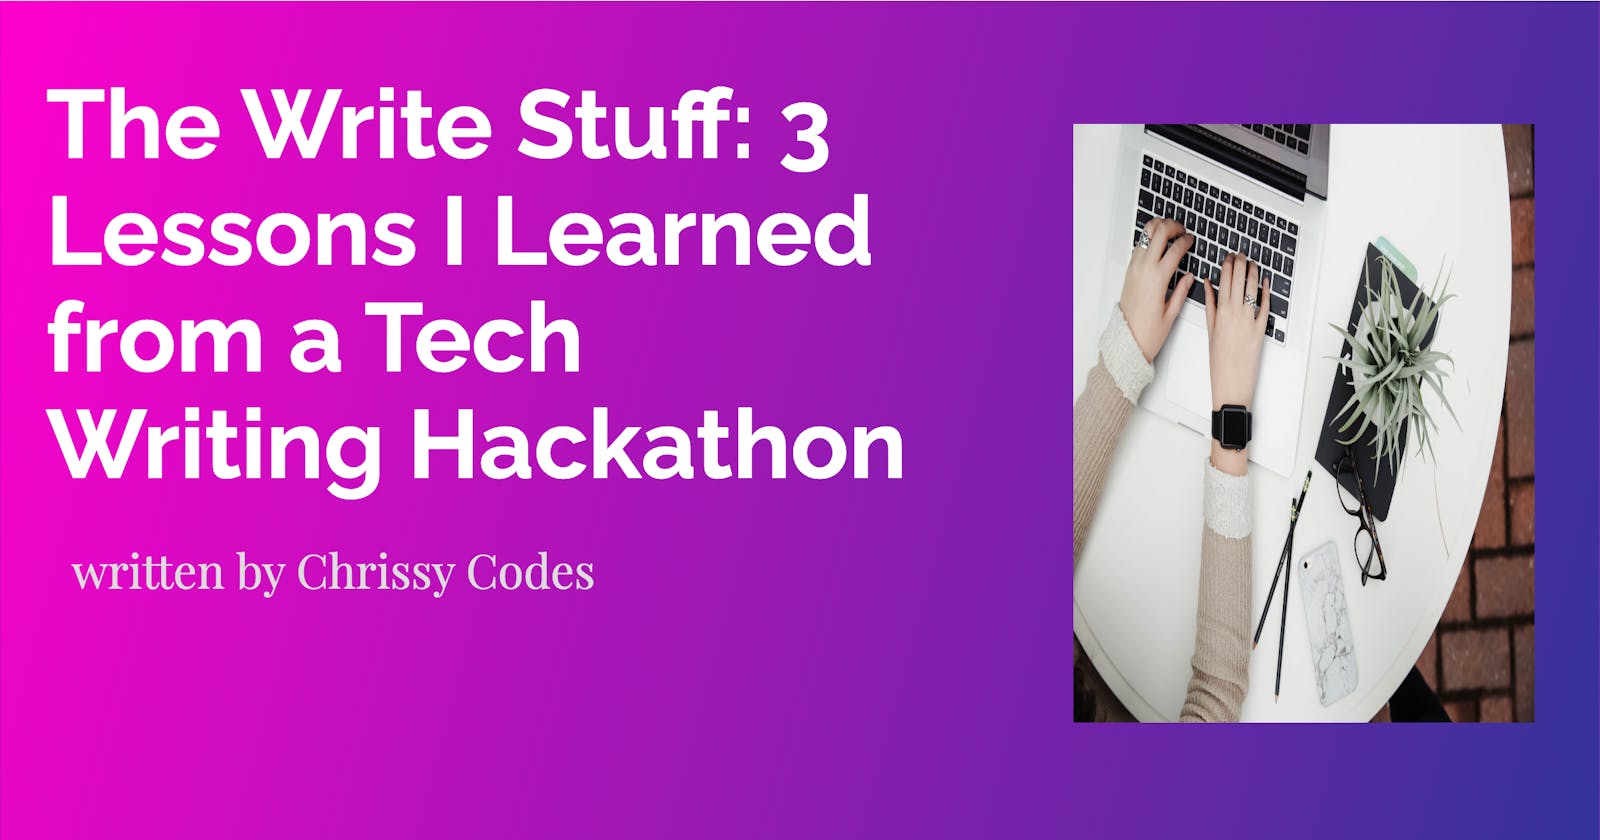 The Write Stuff: 3 Lessons I Learned from a Tech Writing Hackathon